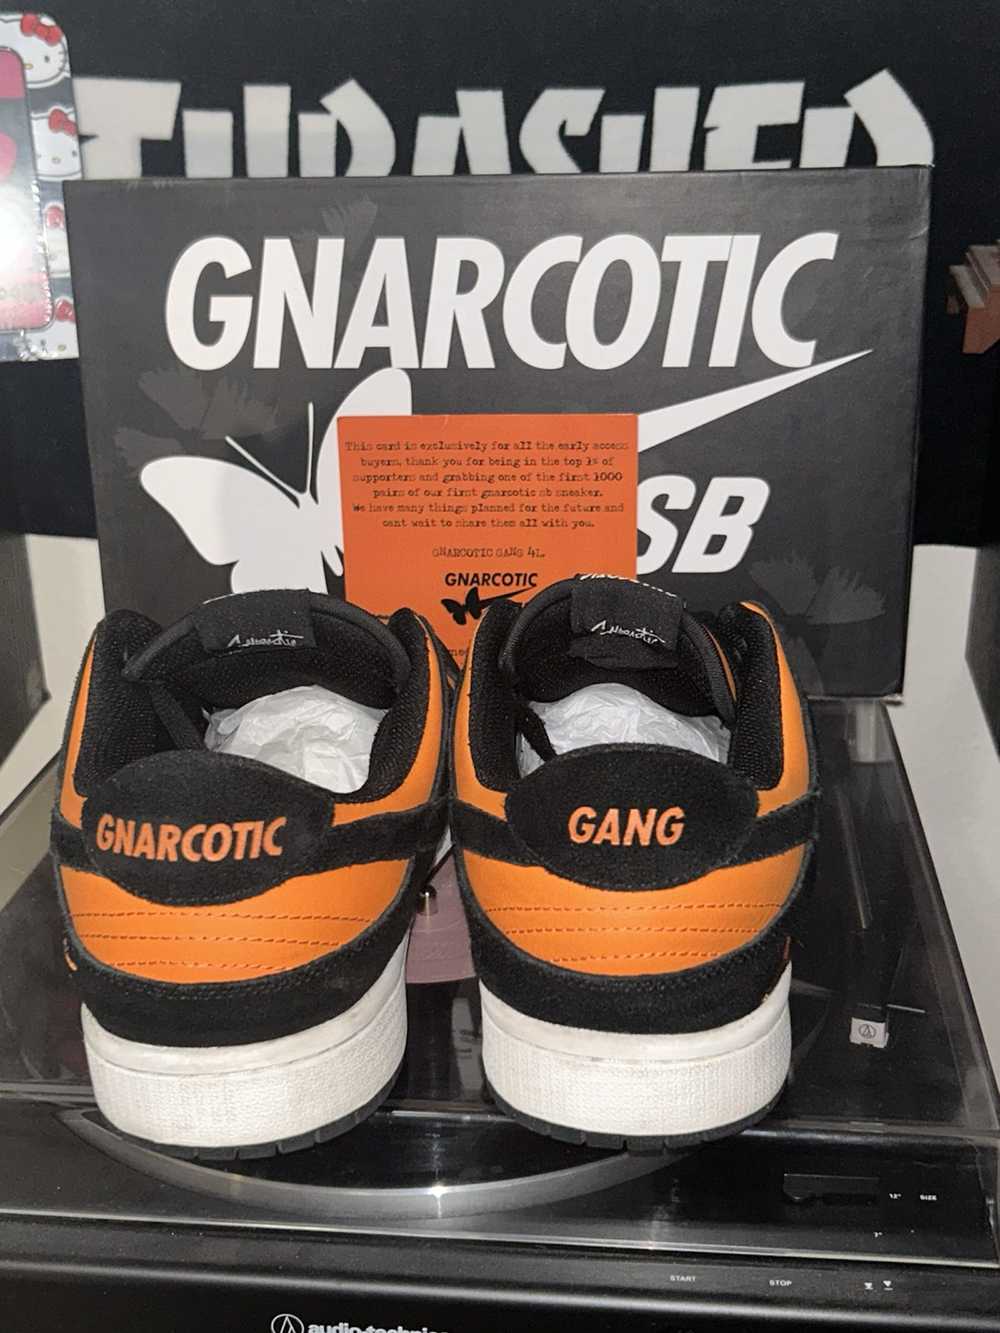 Gnarcotic gnarcotic sb sneakers - image 3